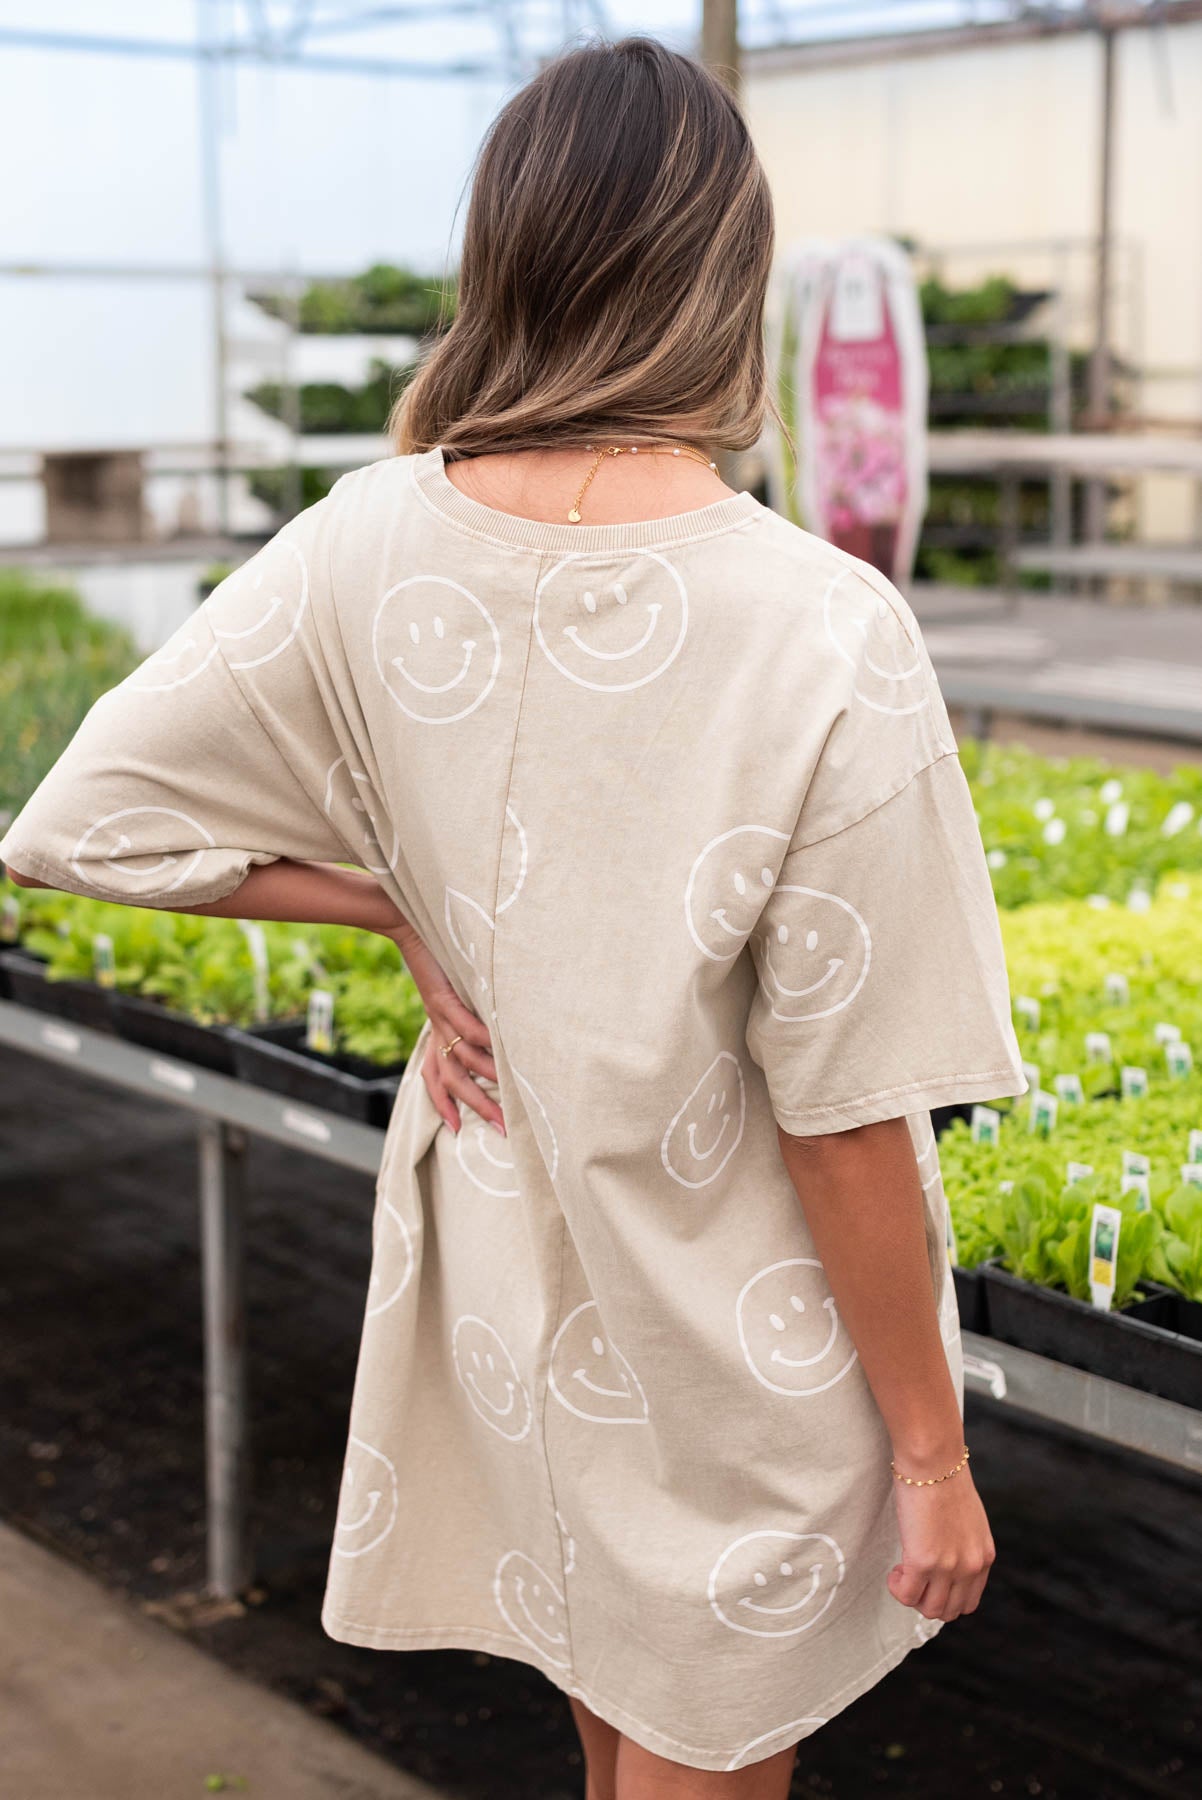 Back view of the khaki tunic dress with white smiley faces